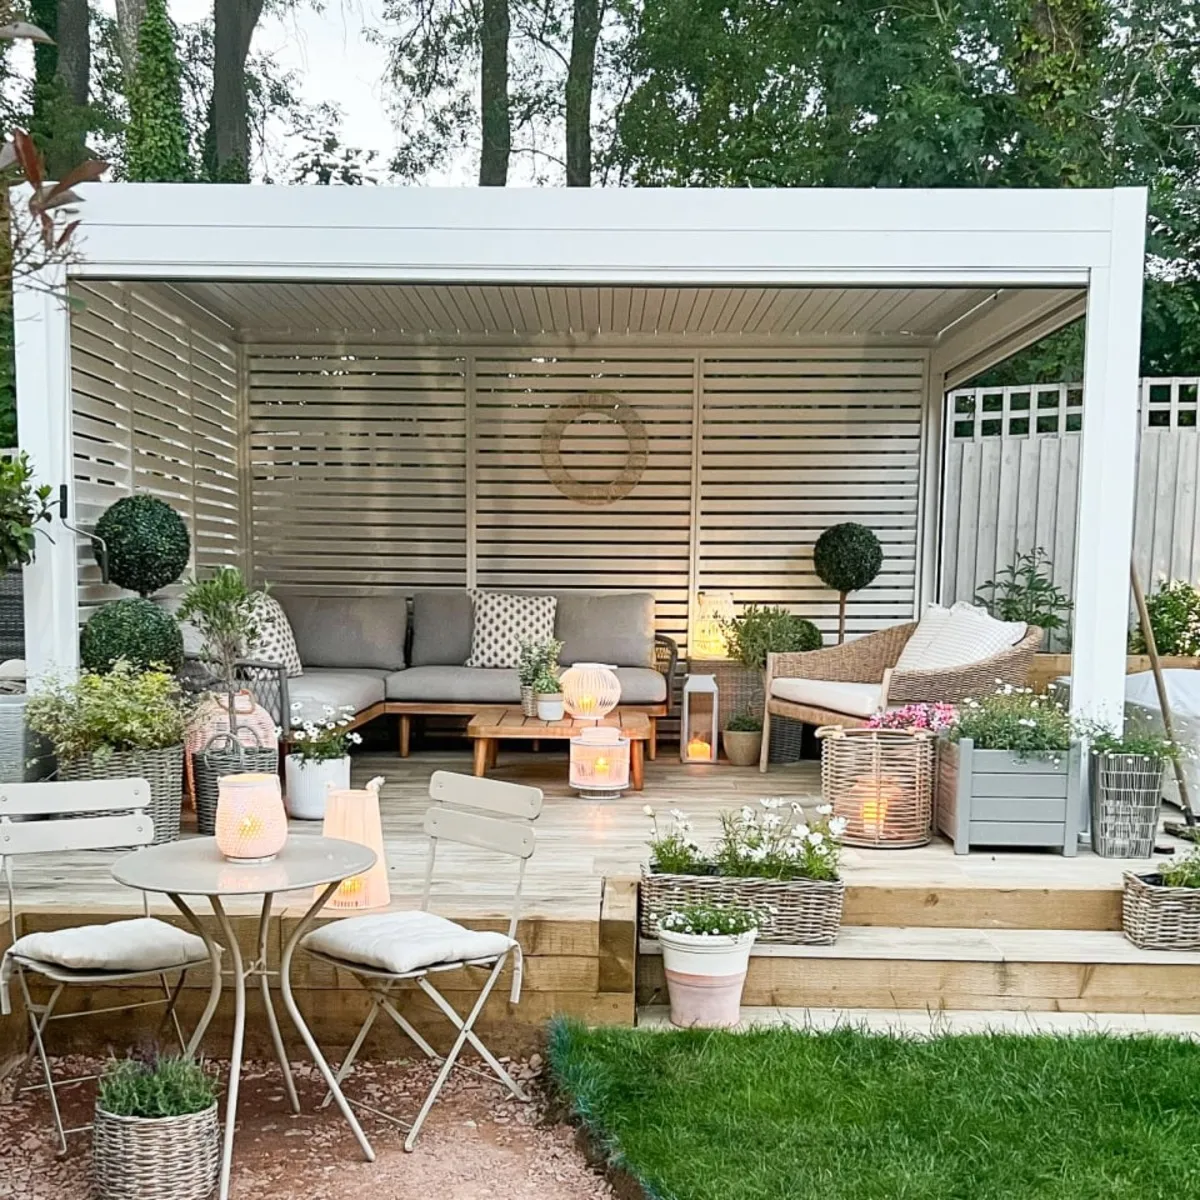 Large white pergola dressed with a corner sofa, chairs, lanterns and plants